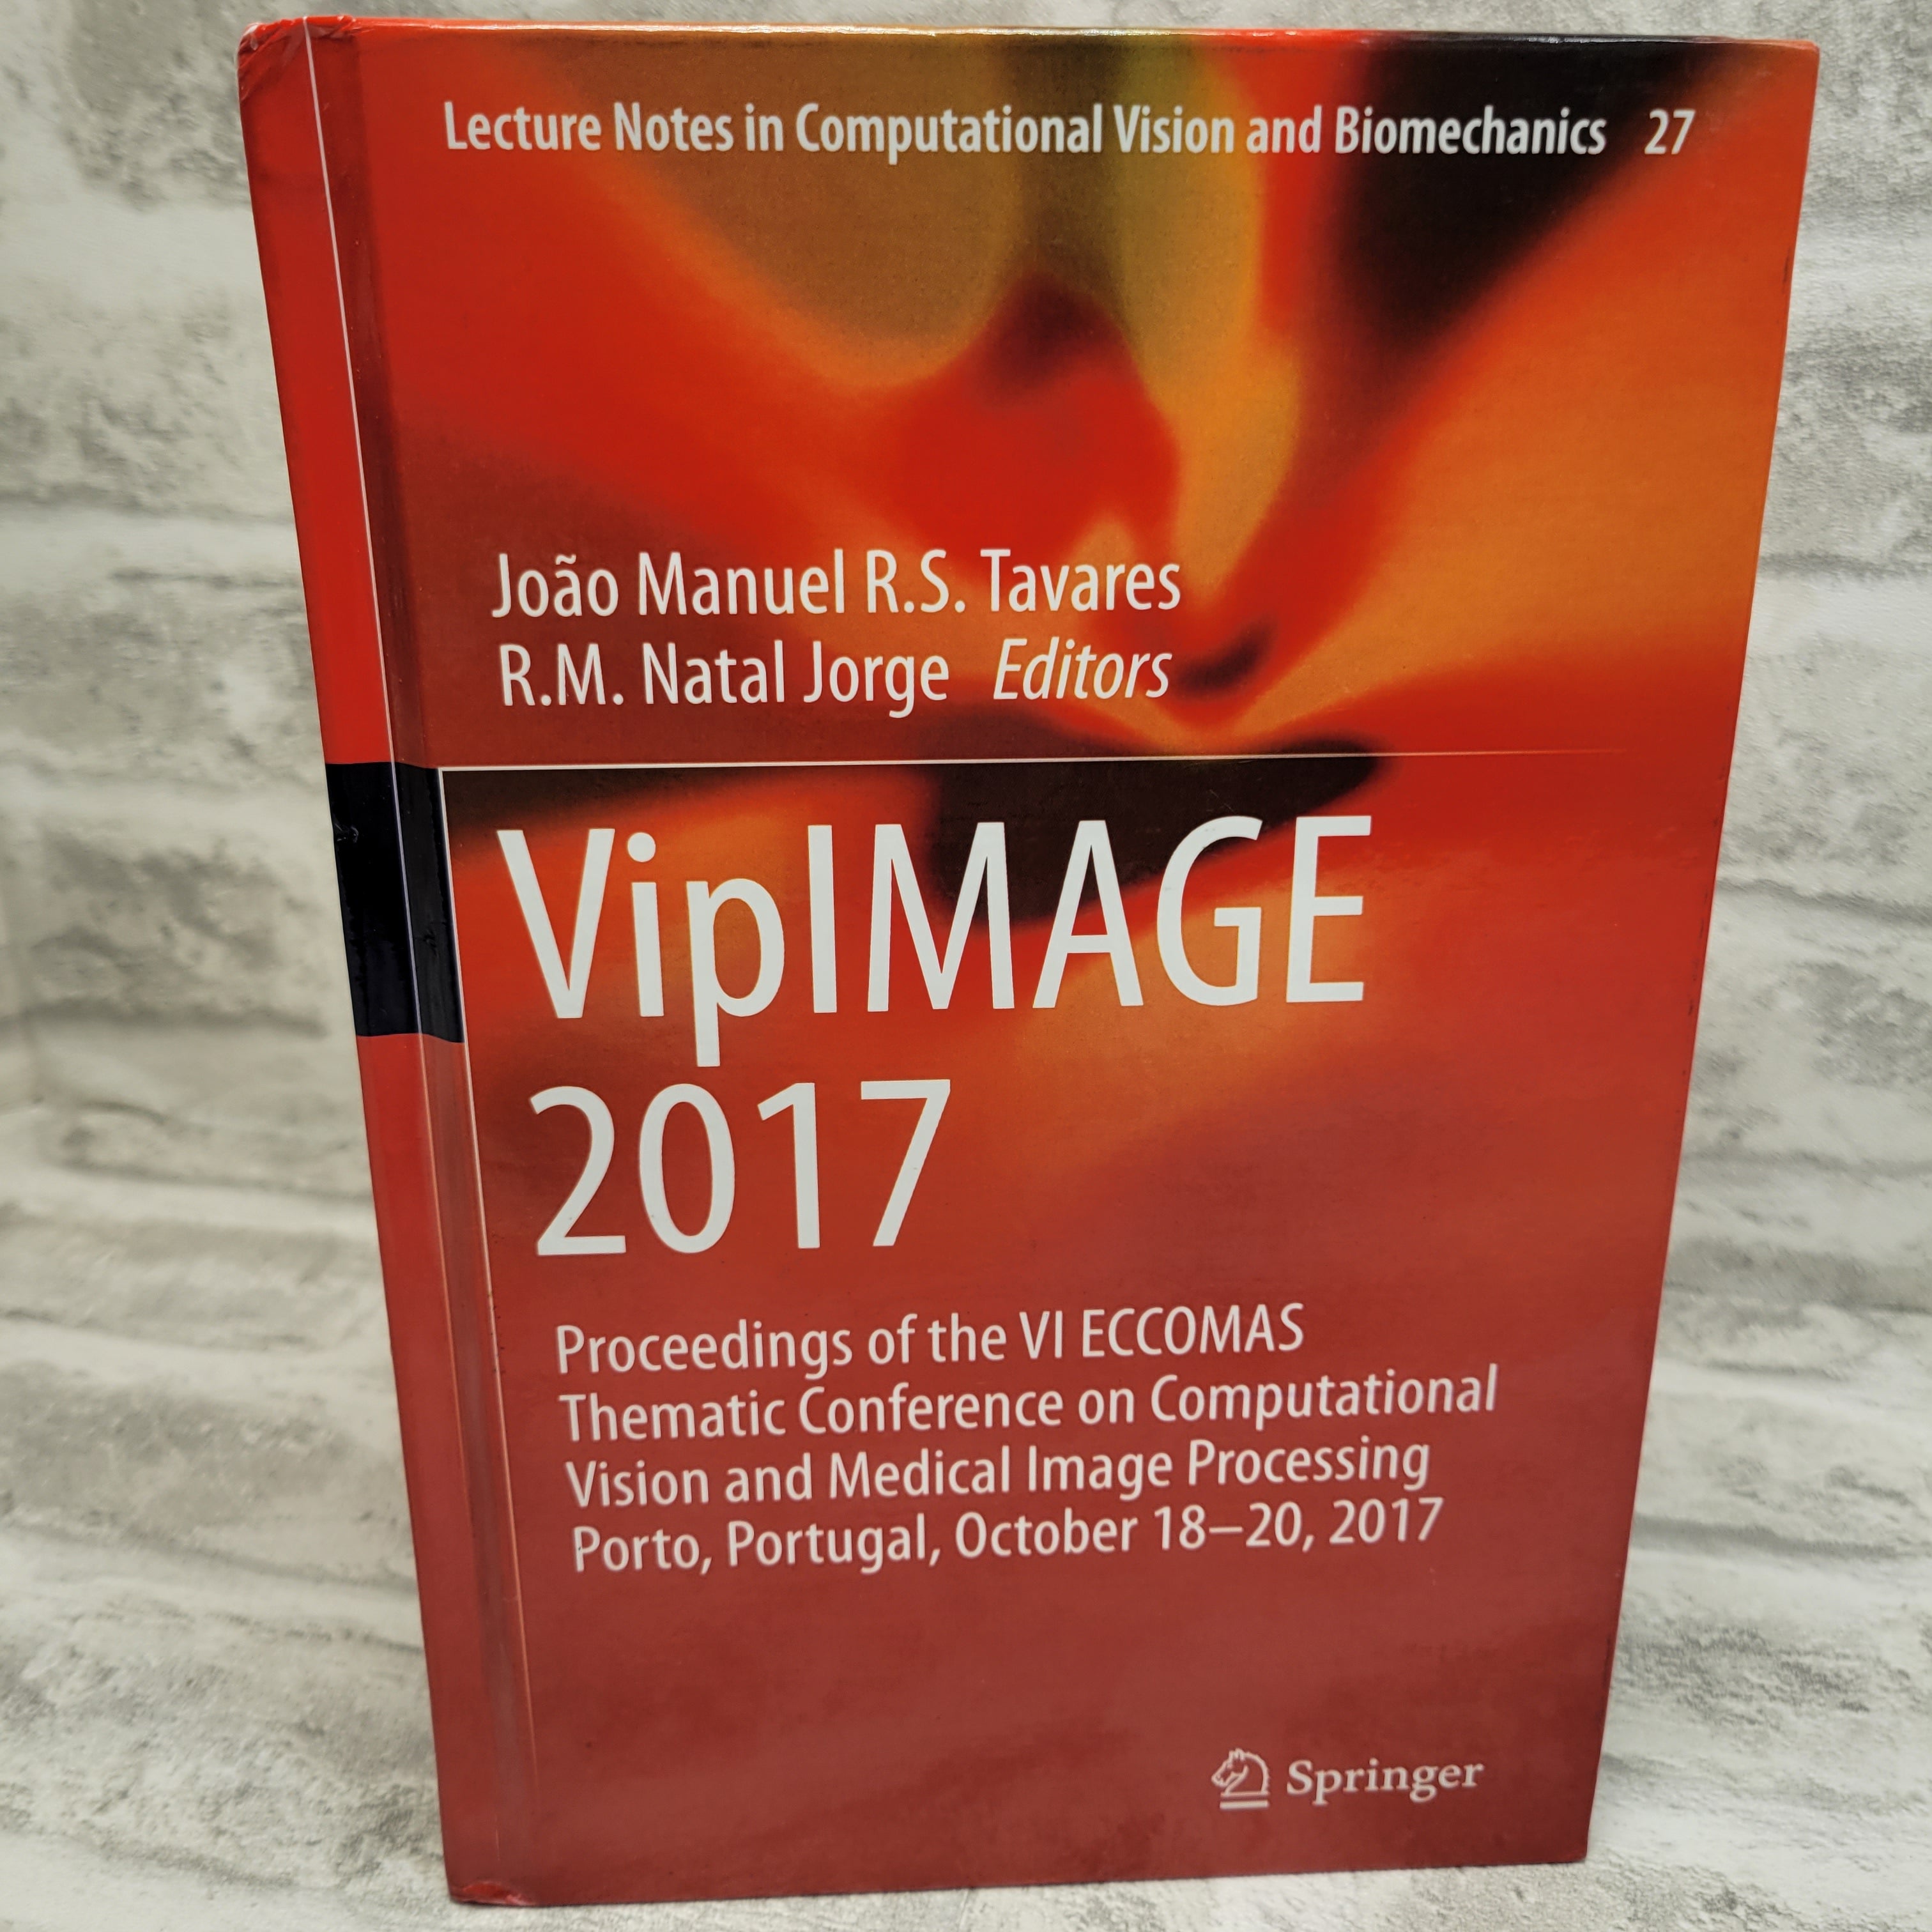 VipIMAGE 2017: Proceedings of the VI ECCOMAS Thematic Conference (7544225956078)